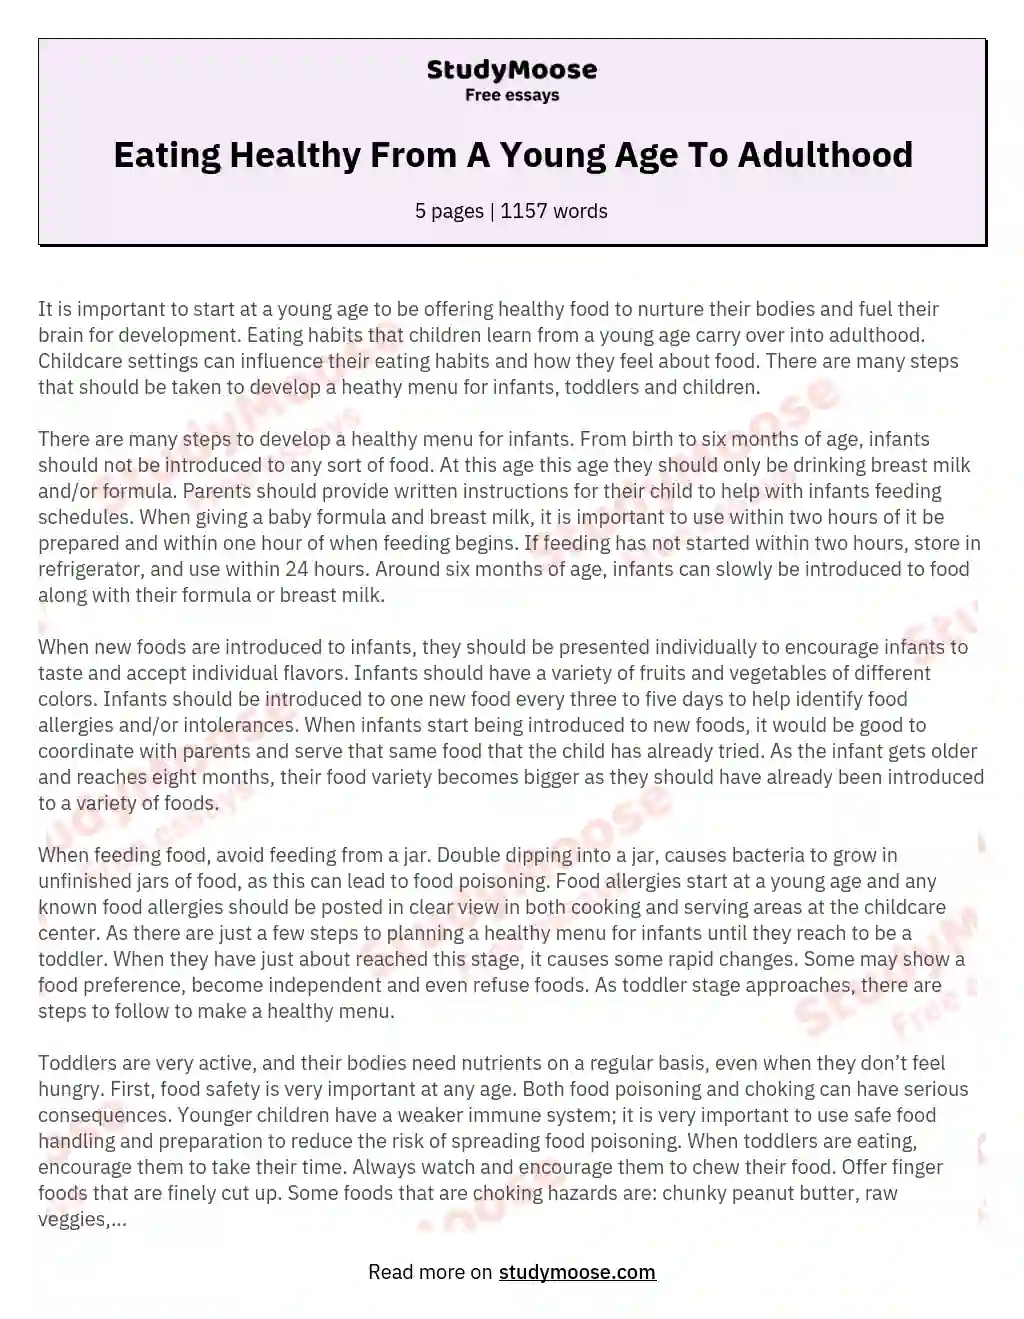 Eating Healthy From A Young Age To Adulthood essay